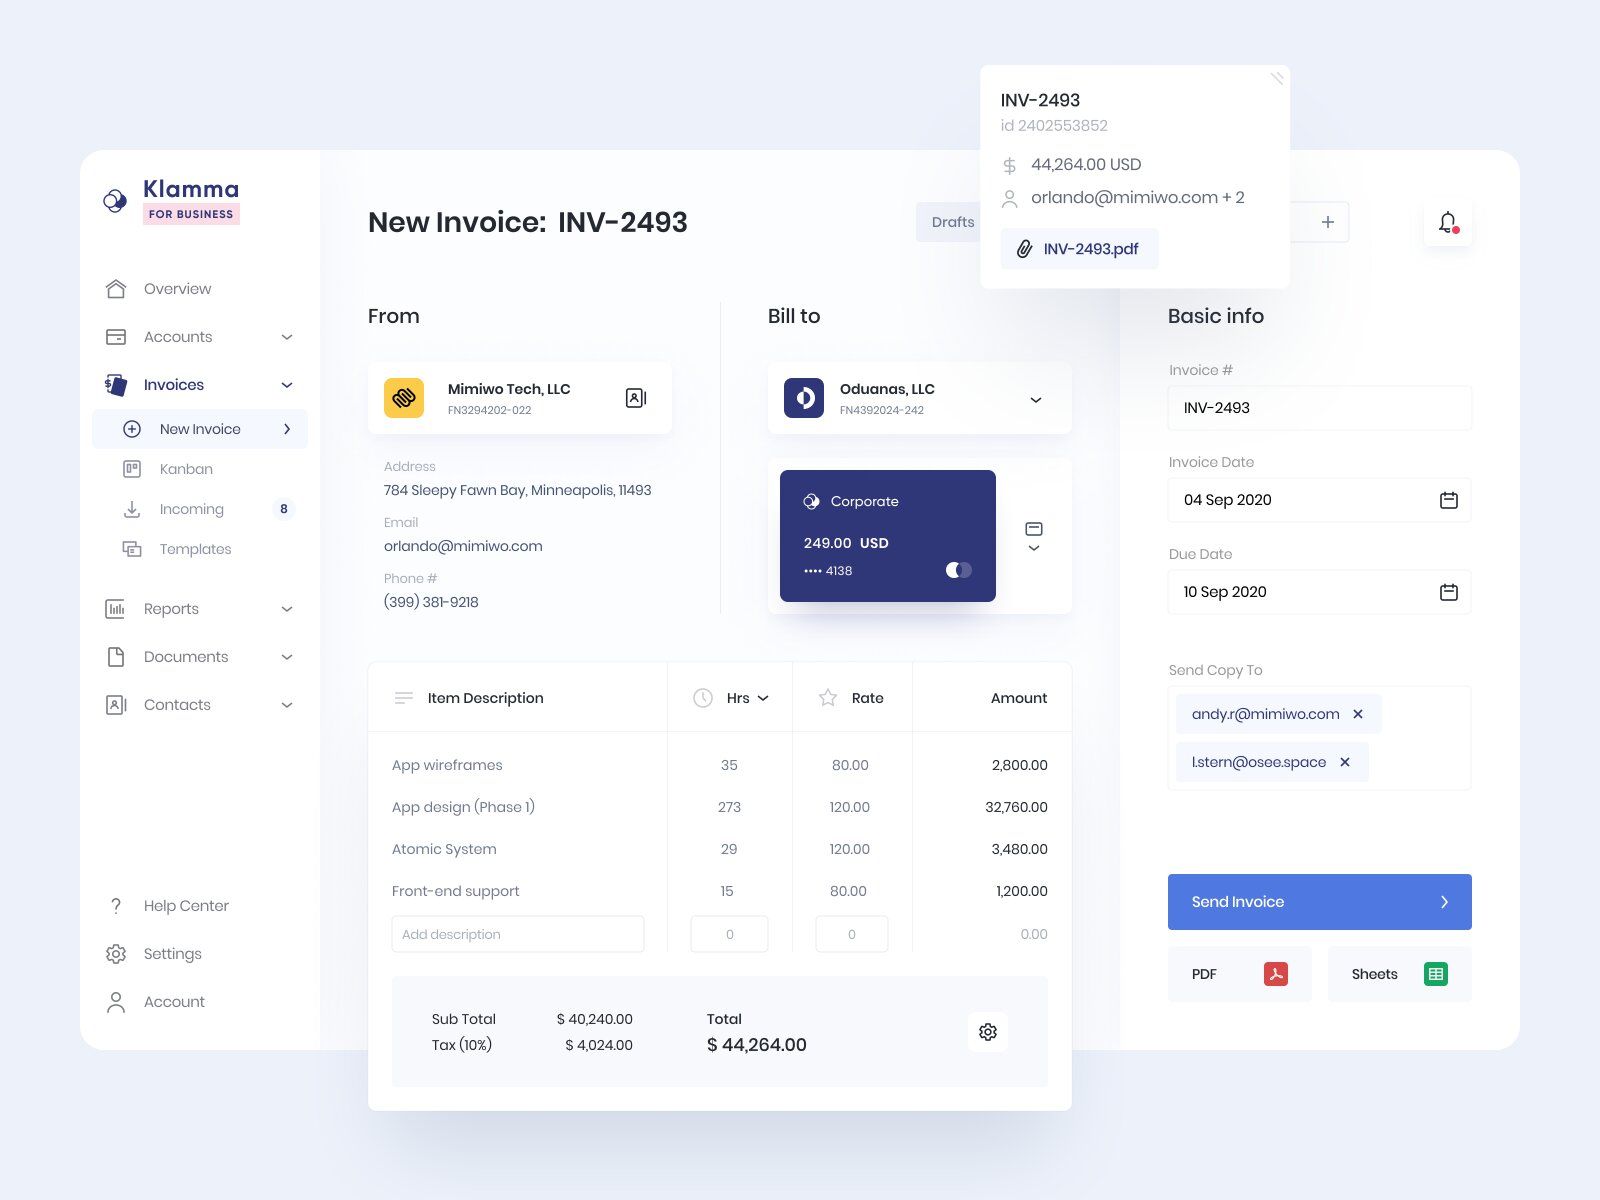 Financial Management feature to add during ERP system development (*image by [Alexander Plyuto 🎲](https://dribbble.com/alexplyuto){ rel="nofollow" target="_blank" .default-md}*)